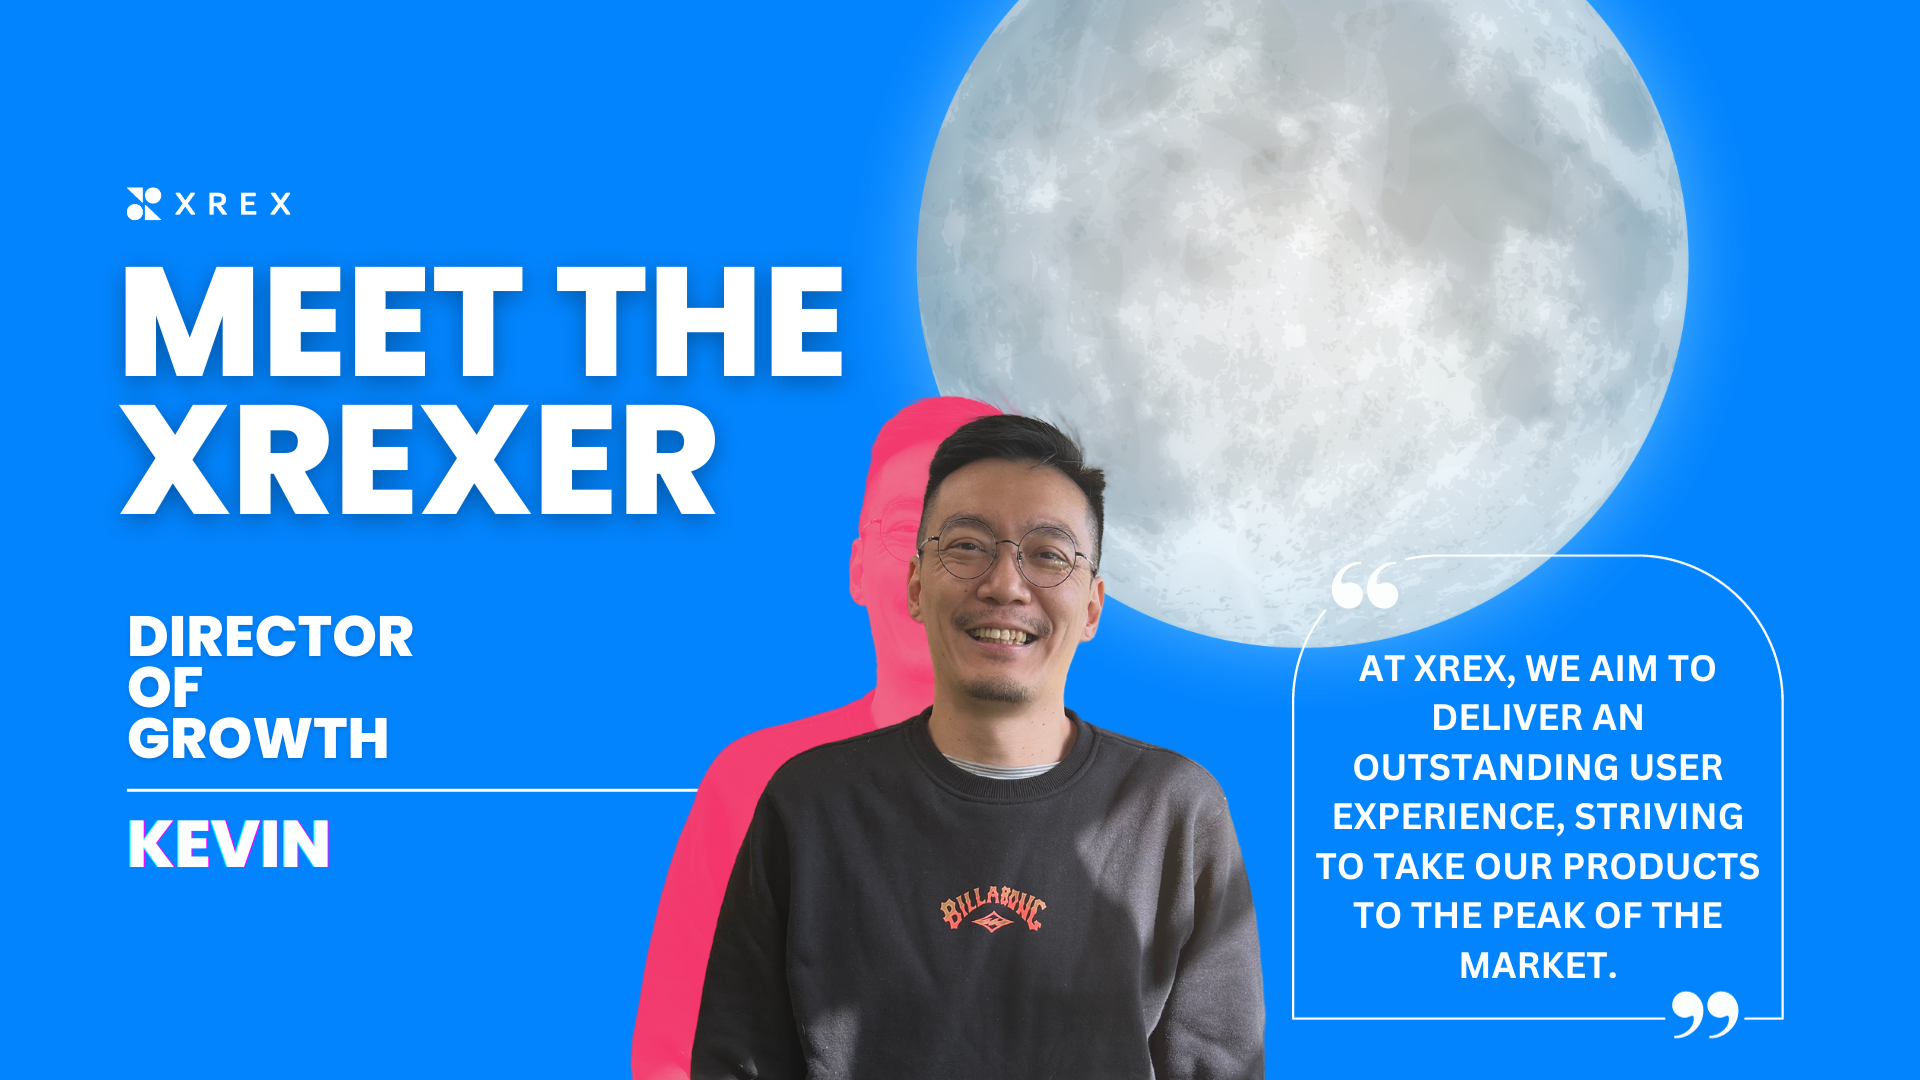 XREXer 特寫：Kevin Yang, Director of Growth